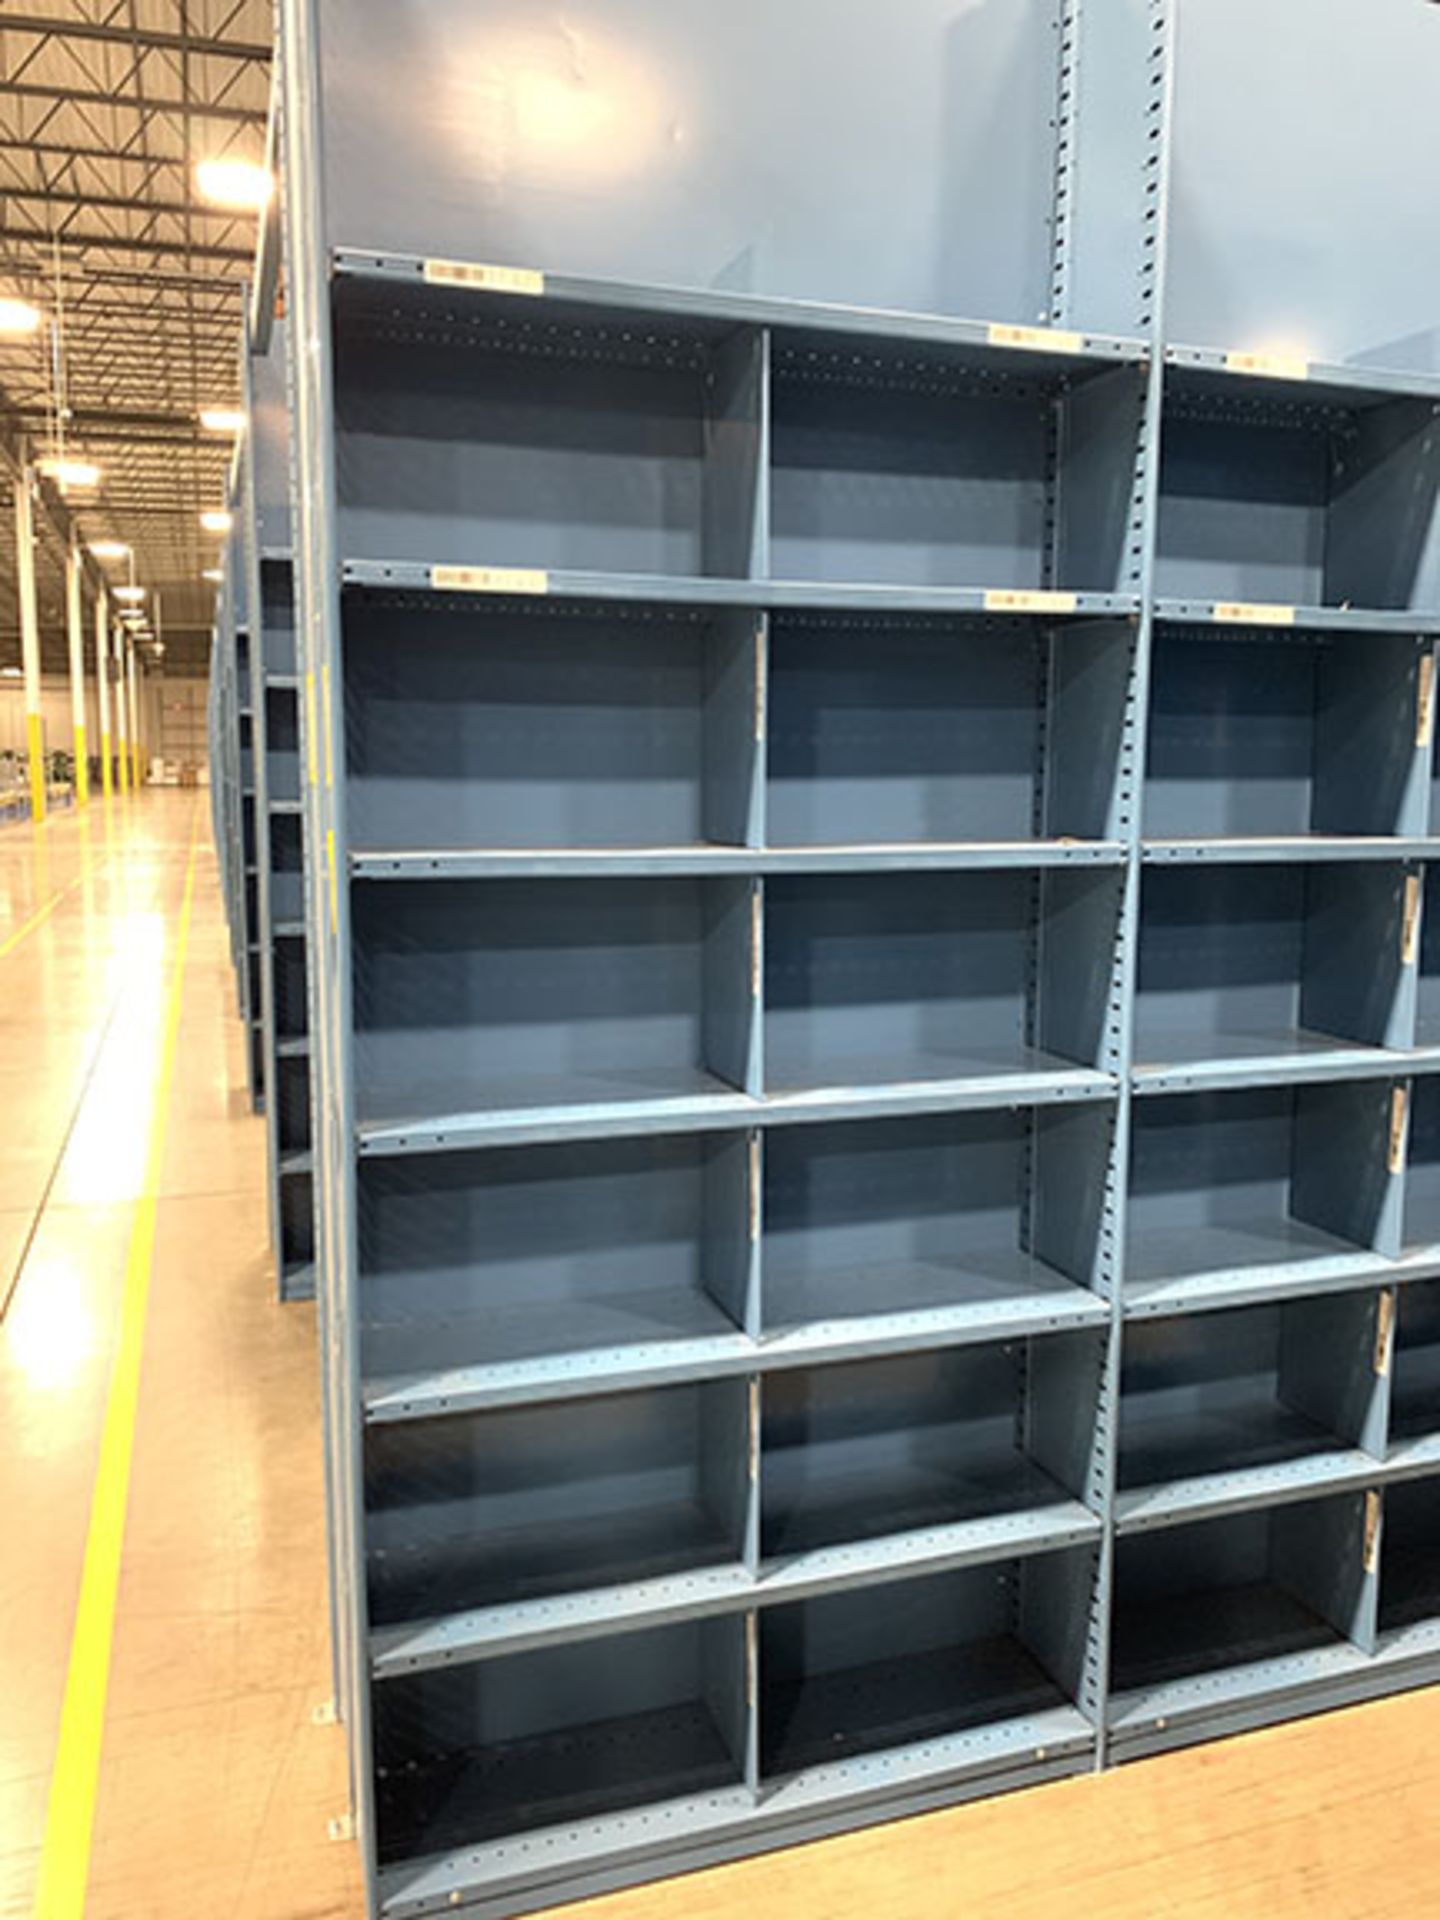 (78) SECTIONS OF HALLOWELL HI-TECH BOLTLESS SHELVING WITH DIVIDERS - Image 3 of 3